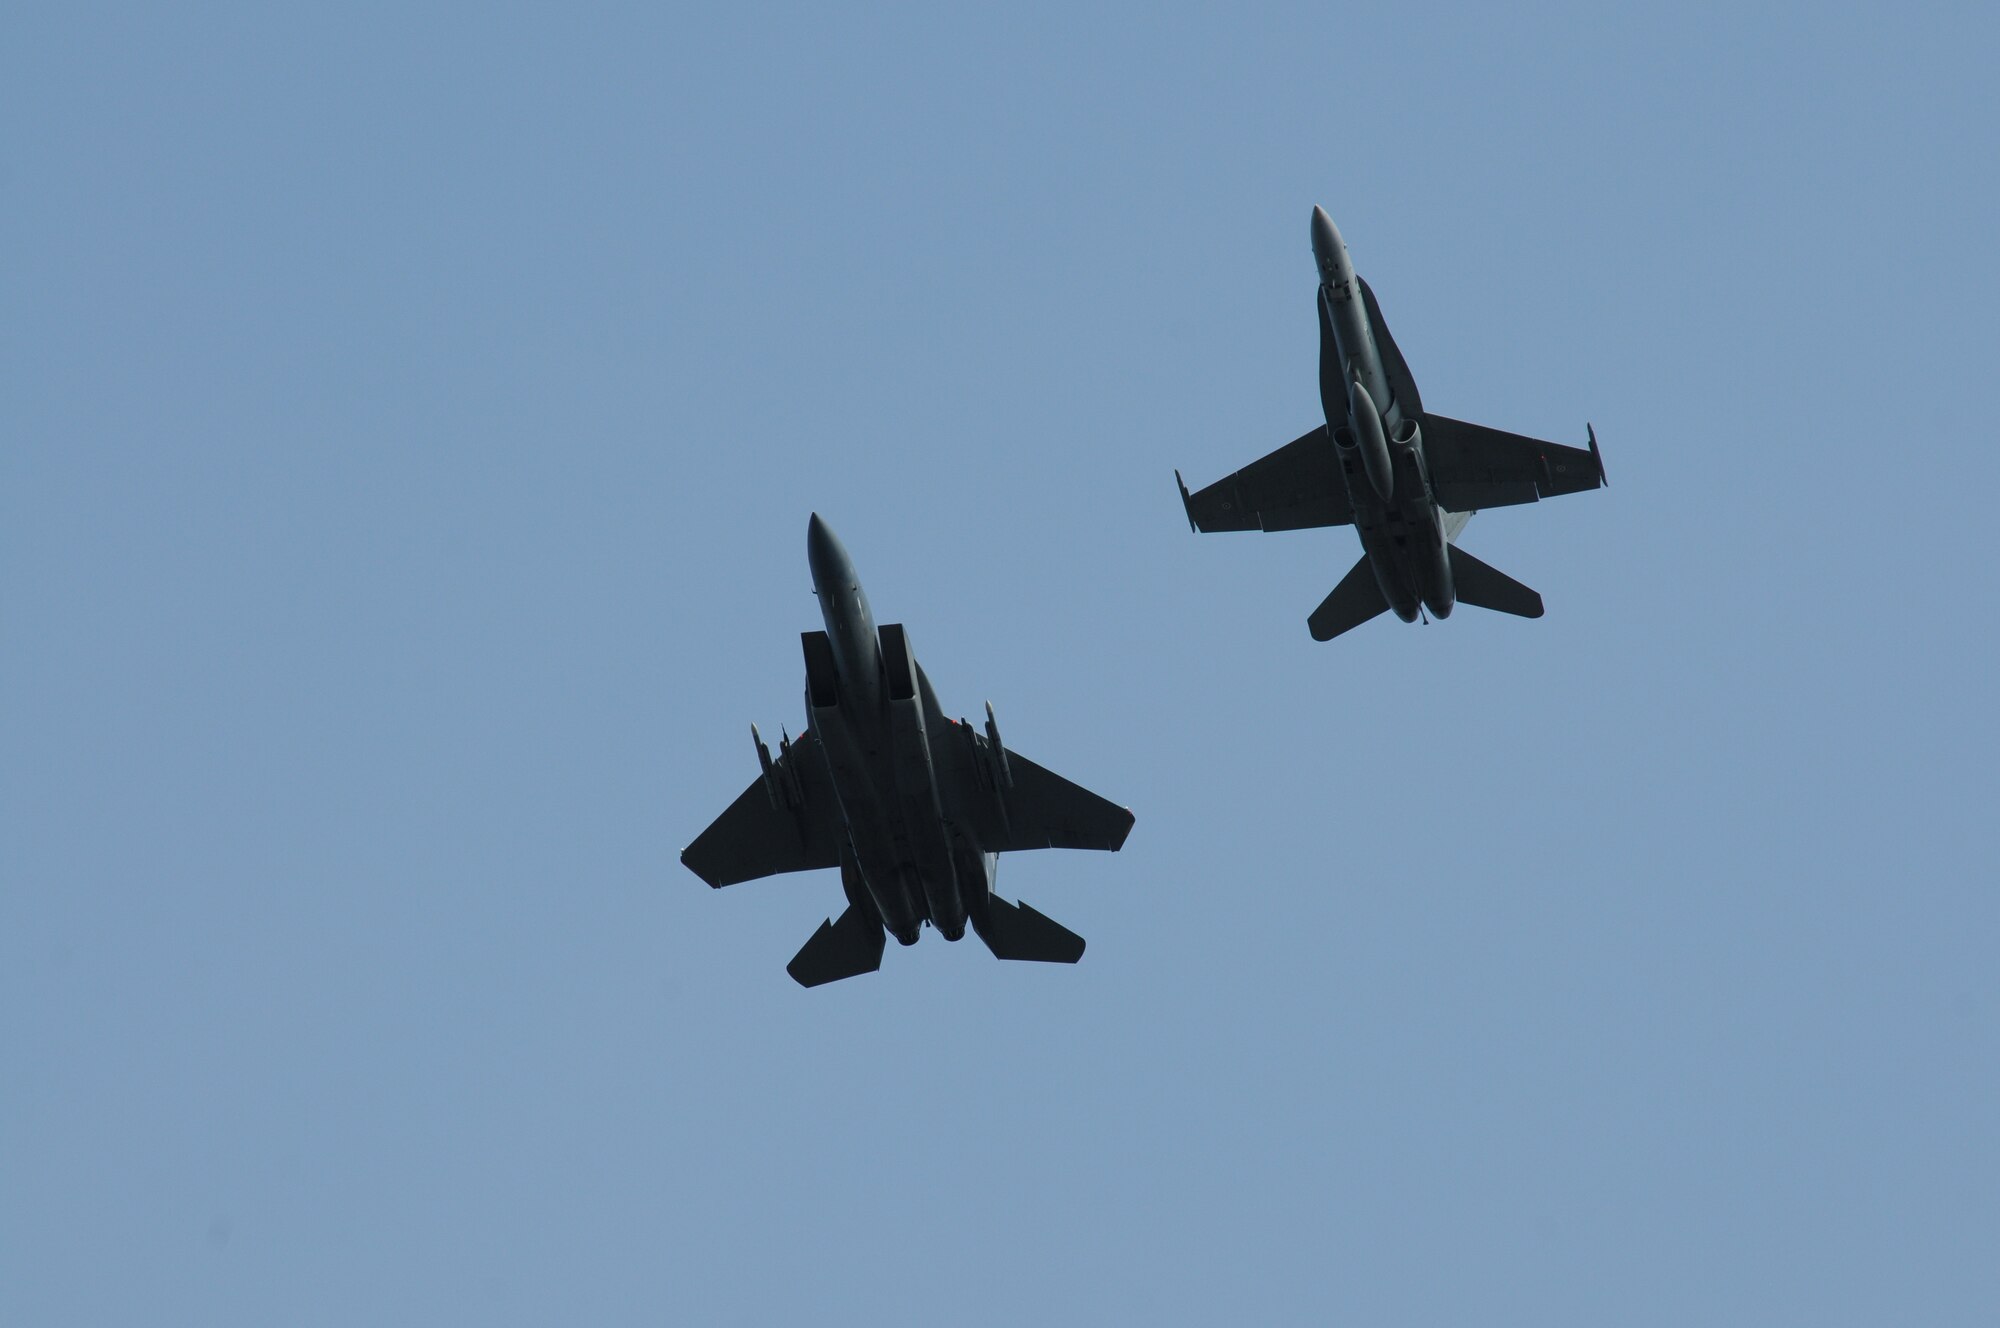 A Finnish air force F-18 and a U.S. Air Force F-15C Eagle from the 173rd Fighter Wing, Oregon Air National Guard, return to Rissala Air Base, Finland following a sortie during a training exercise that is part of Operation Atlantic Resolve, May 10, 2016. Over the course of two weeks the Oregon Air National Guard will fly jointly with the Finnish air force to practice interoperability between the two forces. (U.S. Air National Guard photo by Tech. Sgt. Jefferson Thompson/released)